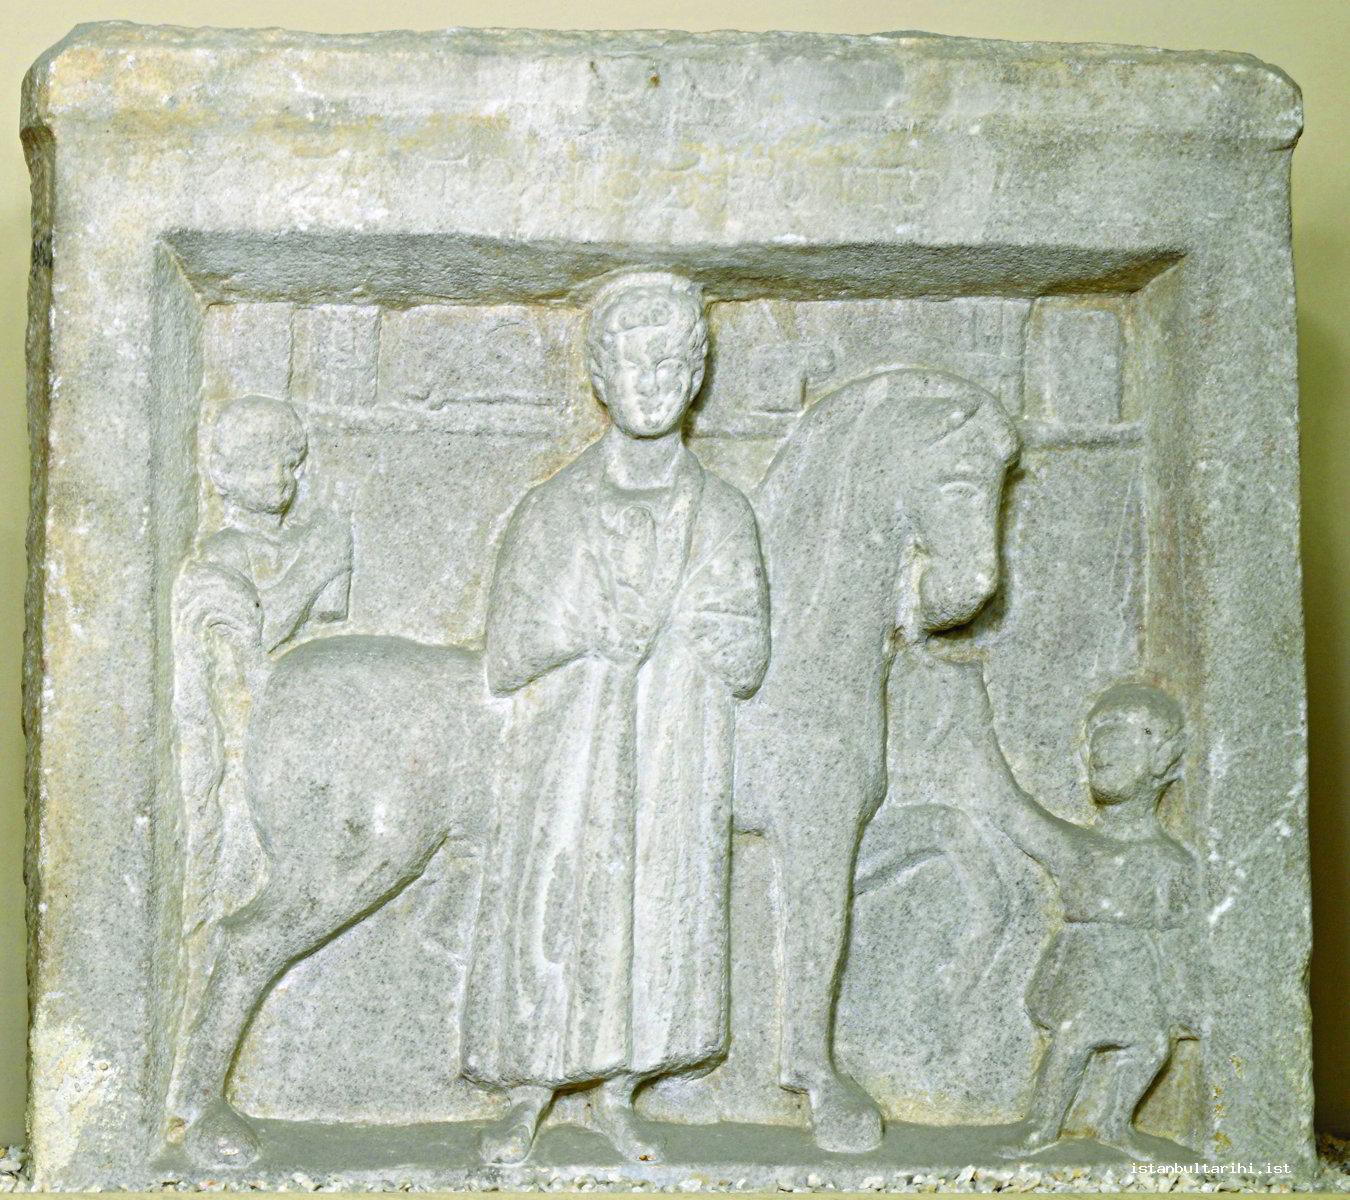 3- An effigy found in Gedikpaşa excavations, which is assumed to belong to a philosopher (Istanbul Archeology Museum)